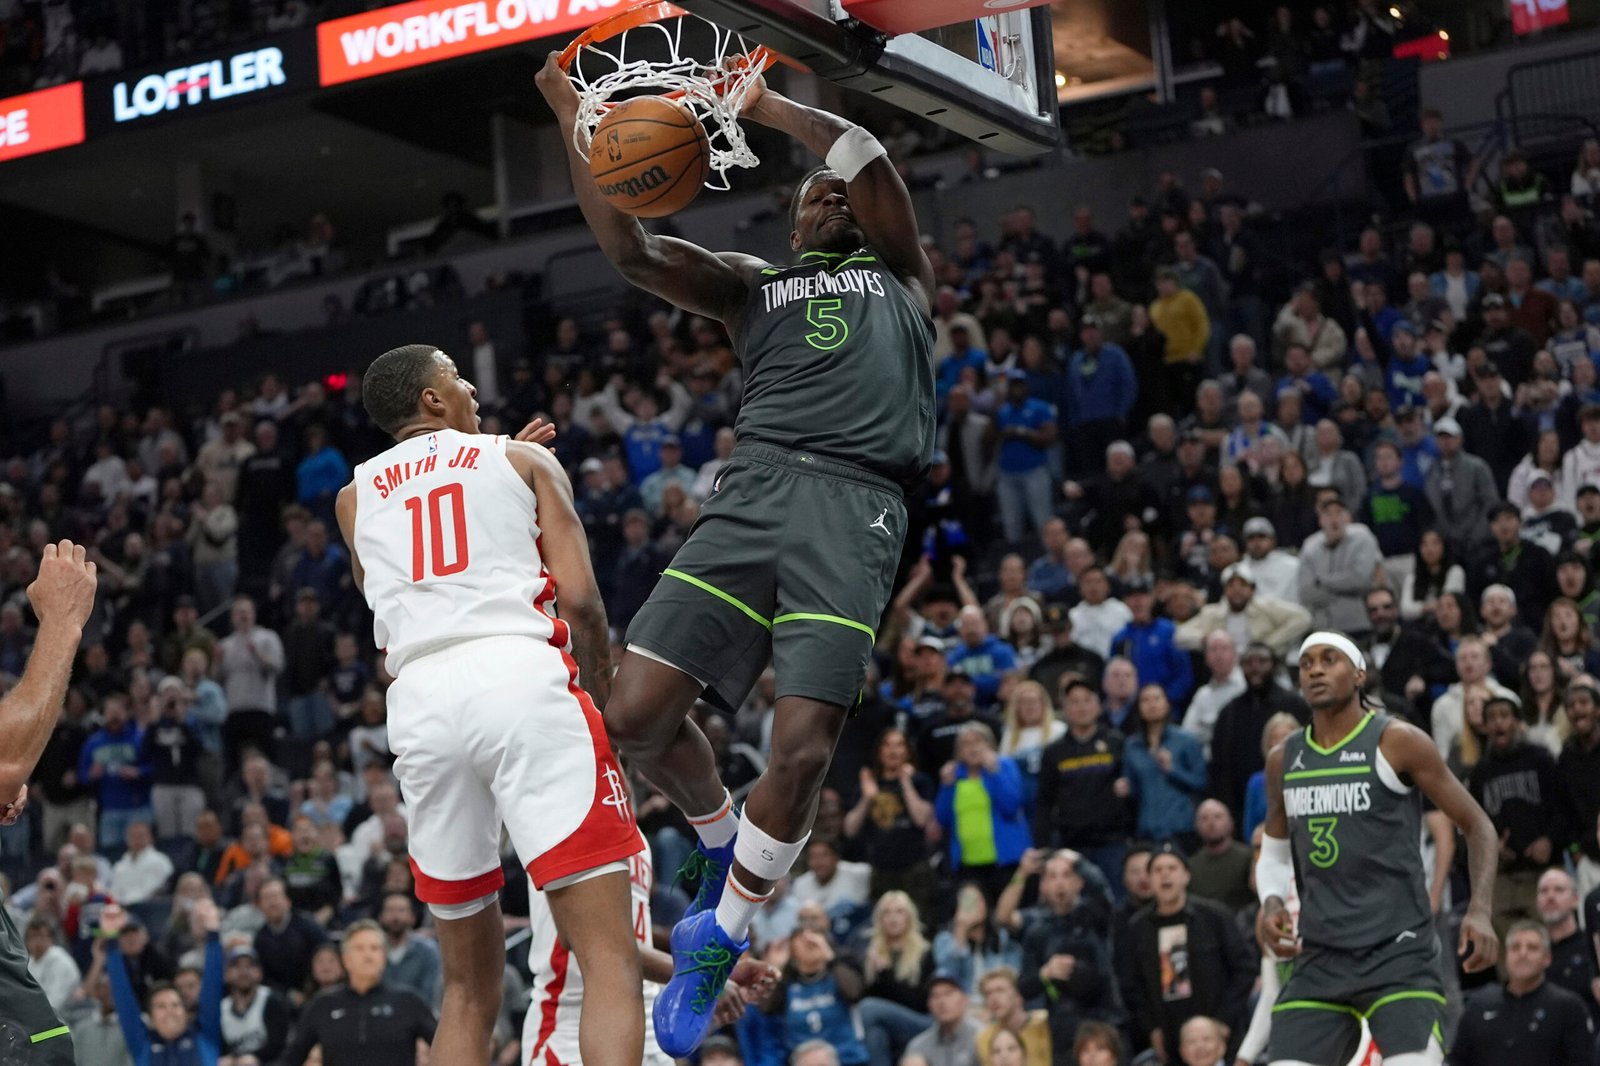 NBA: Timberwolves gain ground in West with win over Rockets